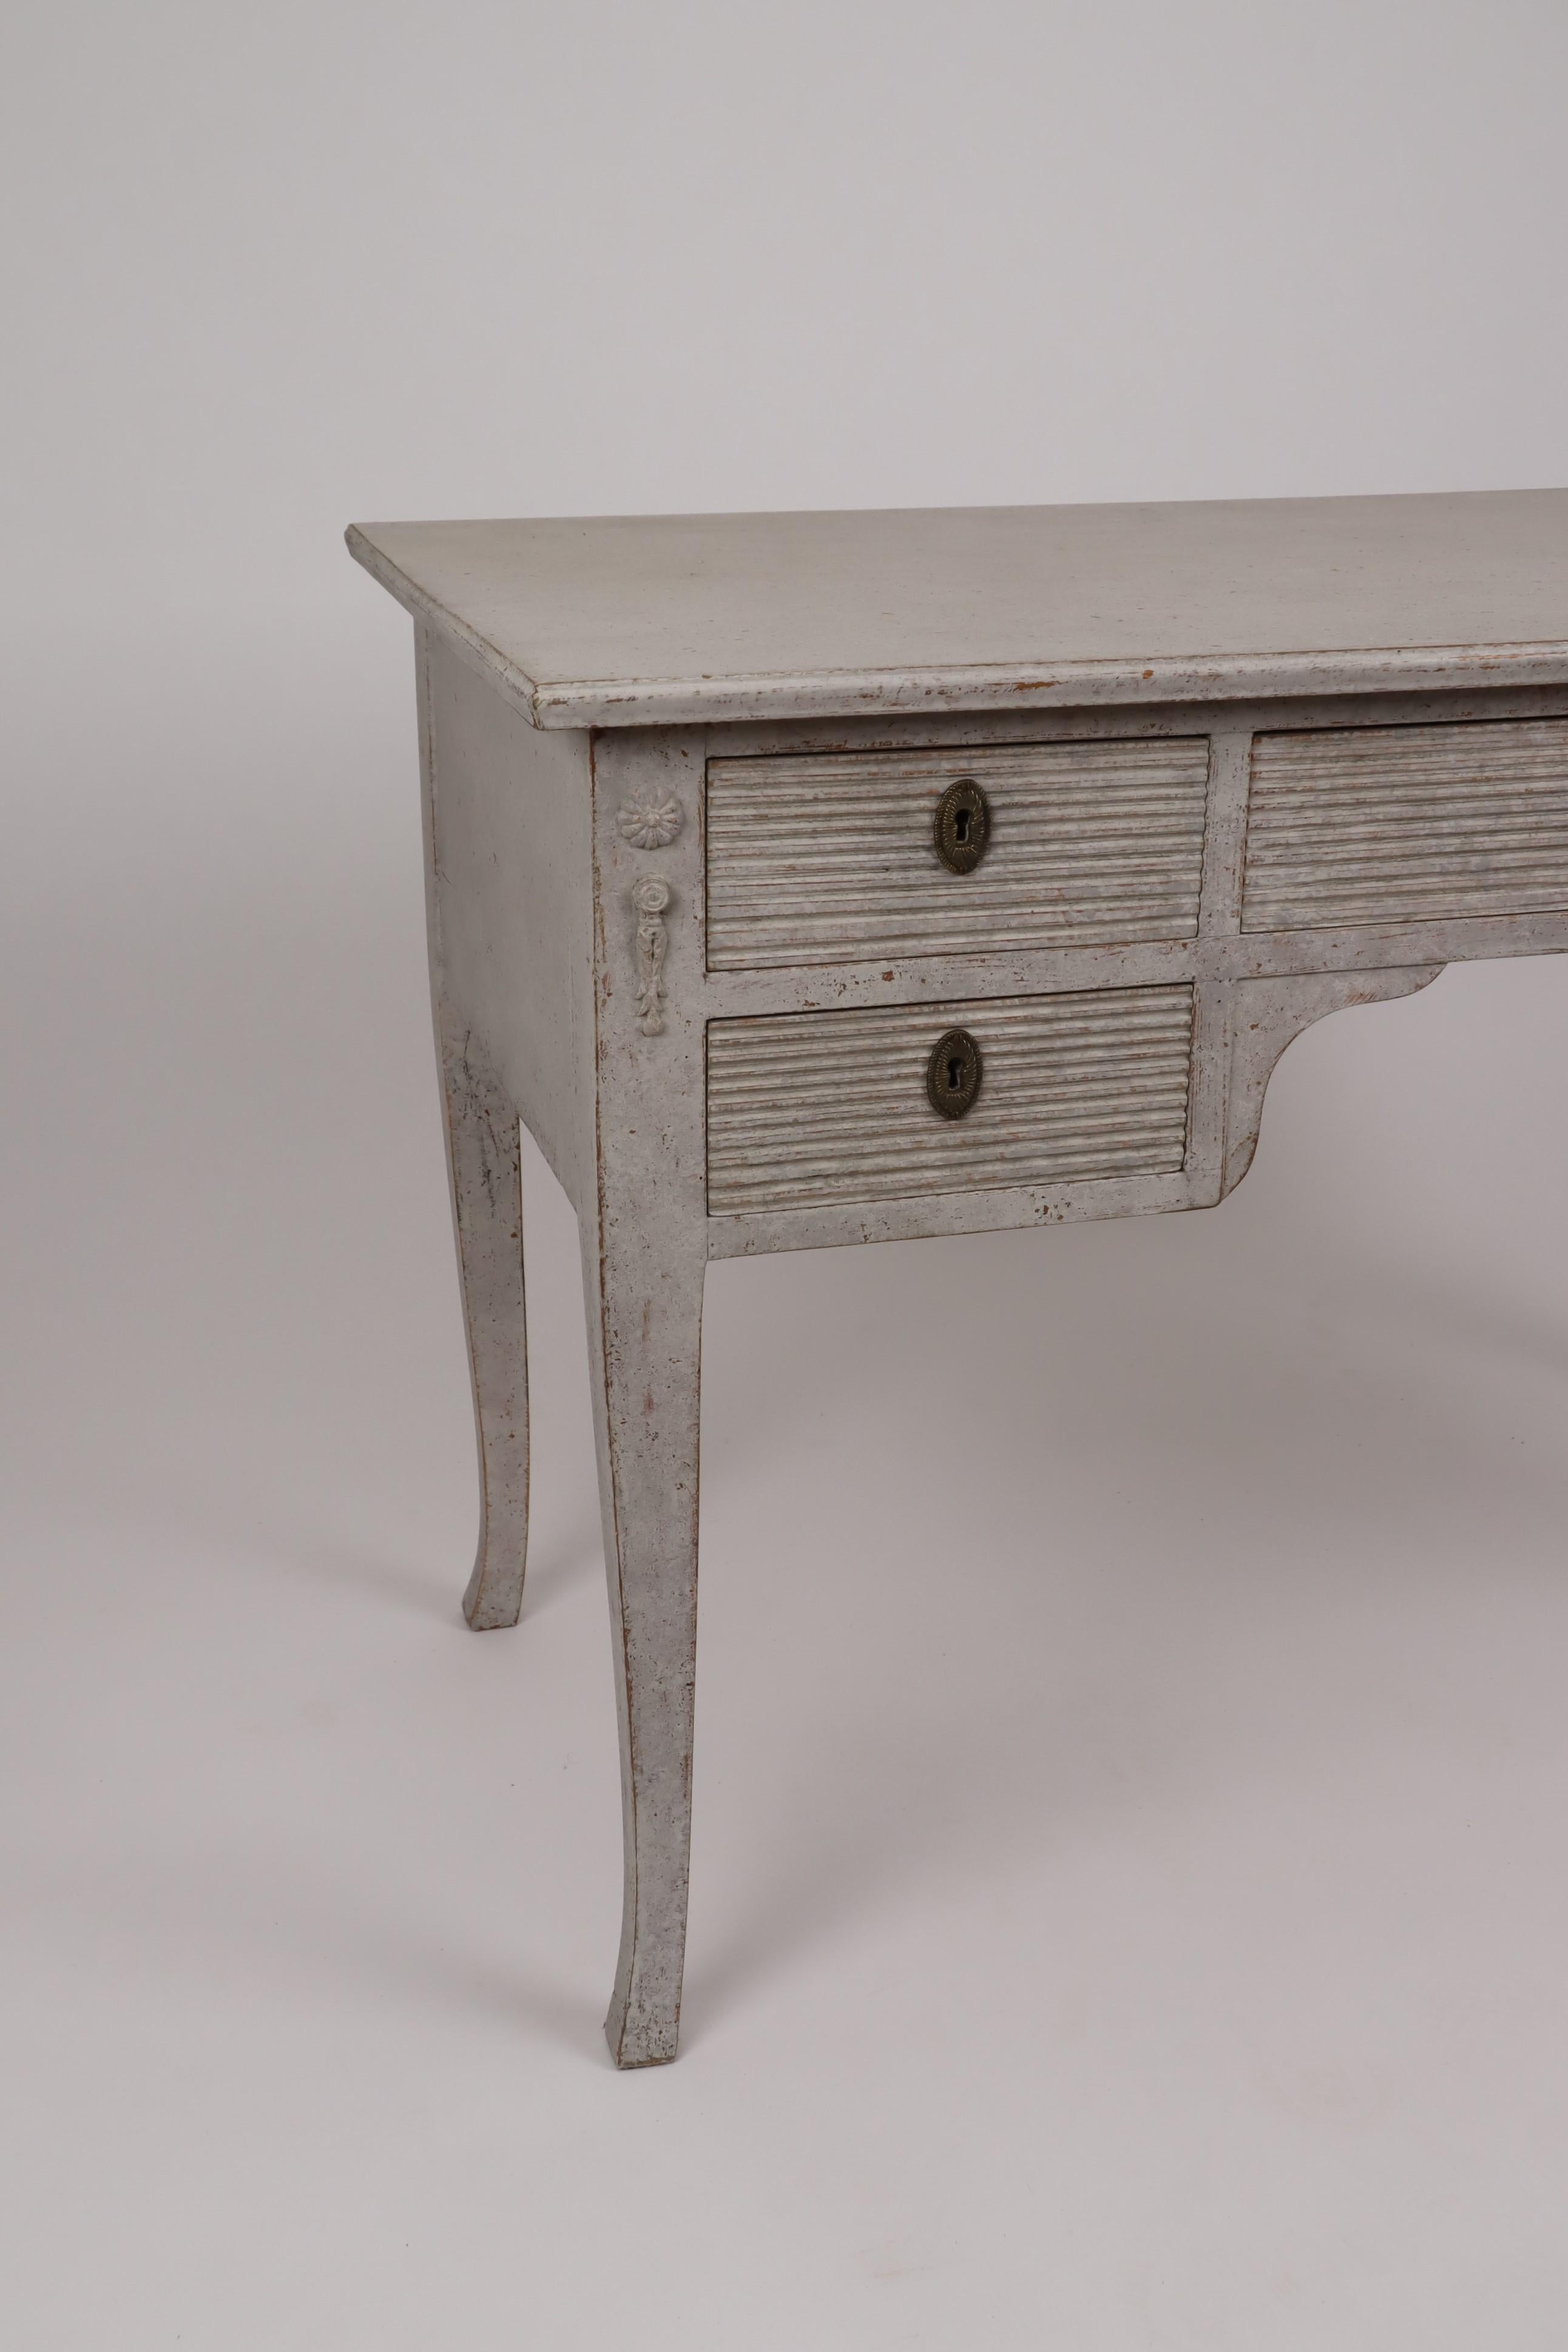 A Swedish five drawer desk from the 20th century with gray beige painted finish, carved reeded accents and slightly curving legs. Discover the understated charm of this Swedish 20th-century desk, presenting a harmonious blend of utility and Nordic